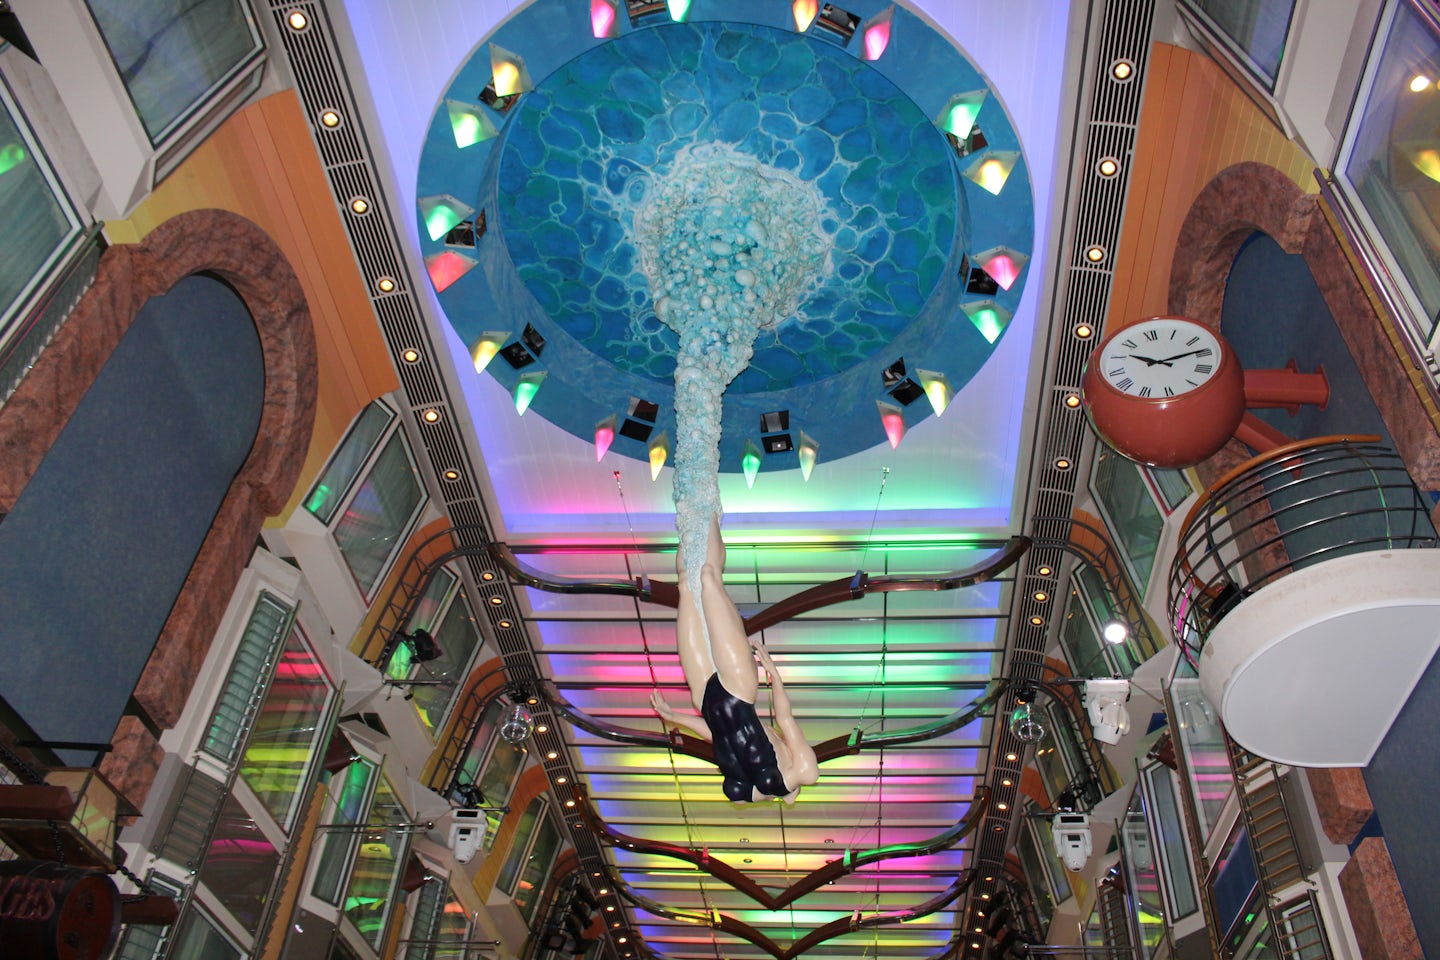 mermaid hanging from the ceiling in the promenade deck